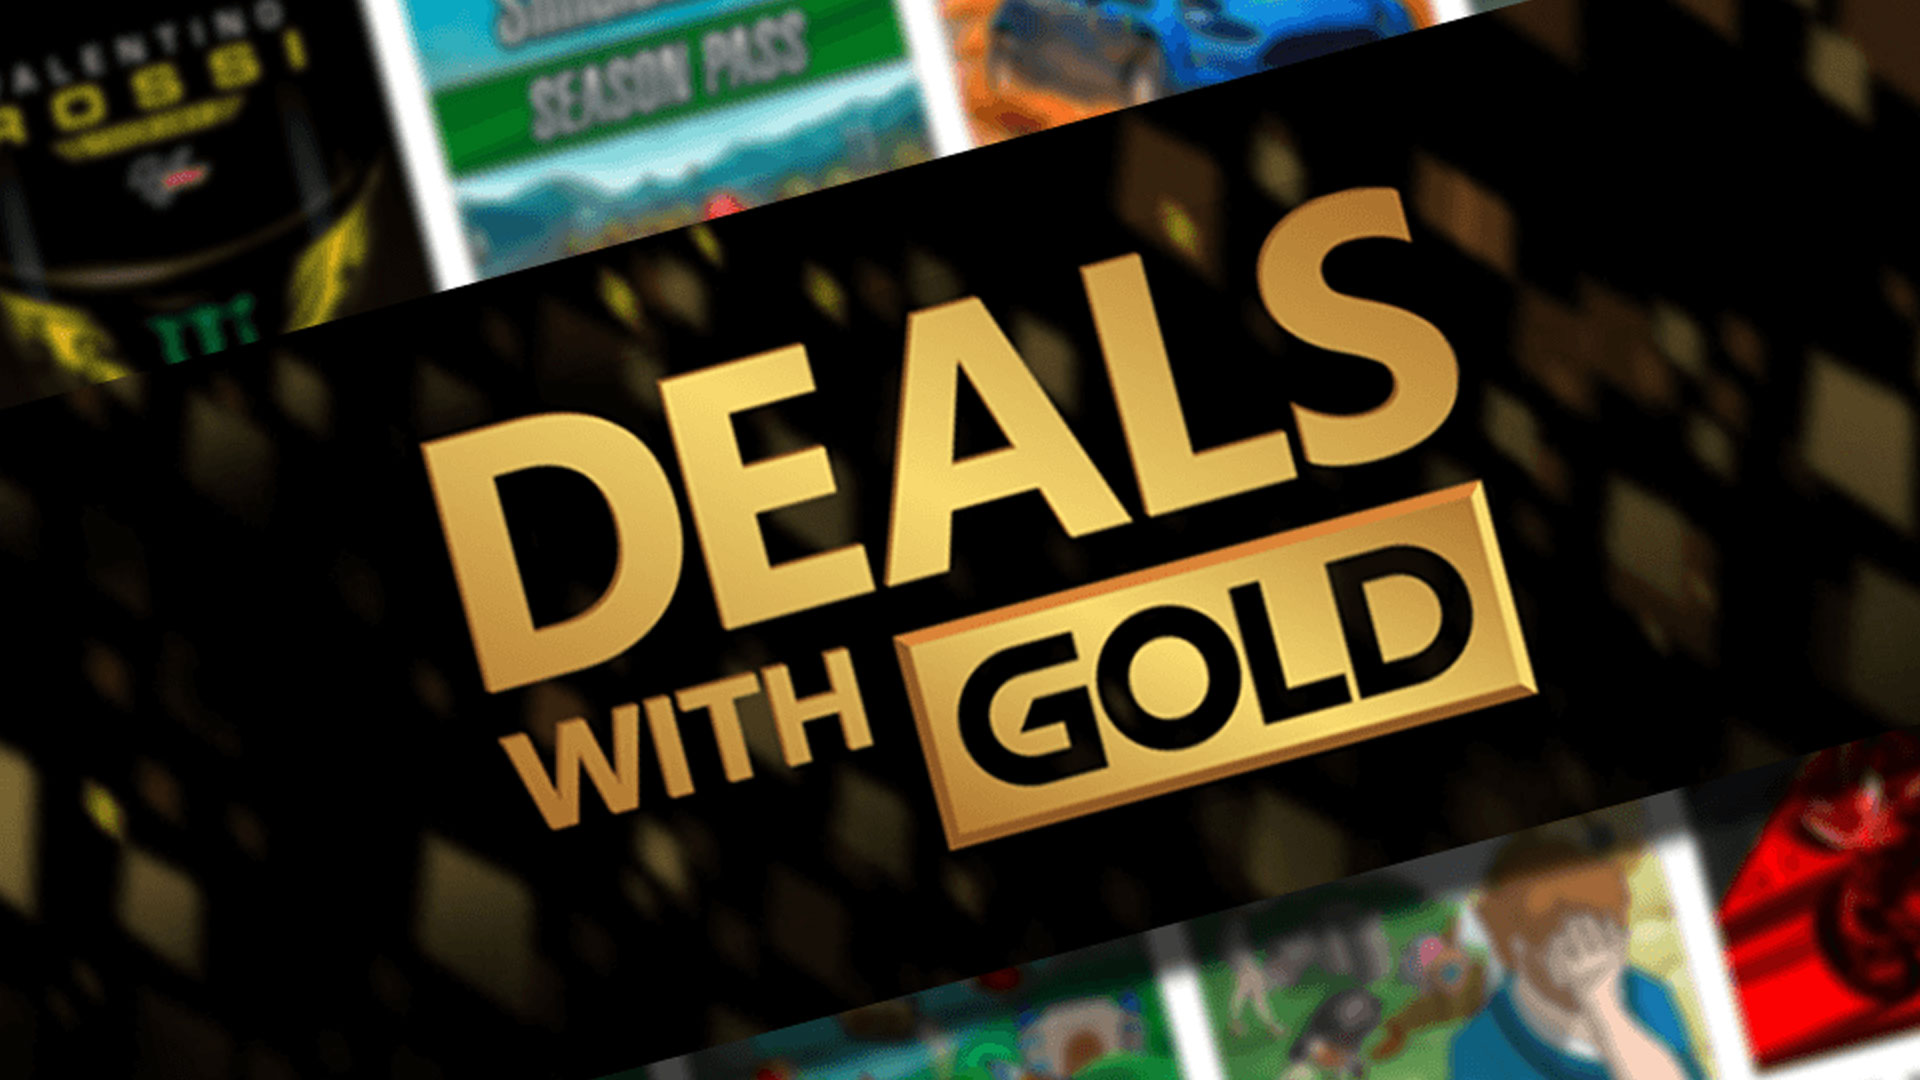 Xbox Deals with Gold: GTA 5 and Max: The Curse Of Brotherhood are 67% off